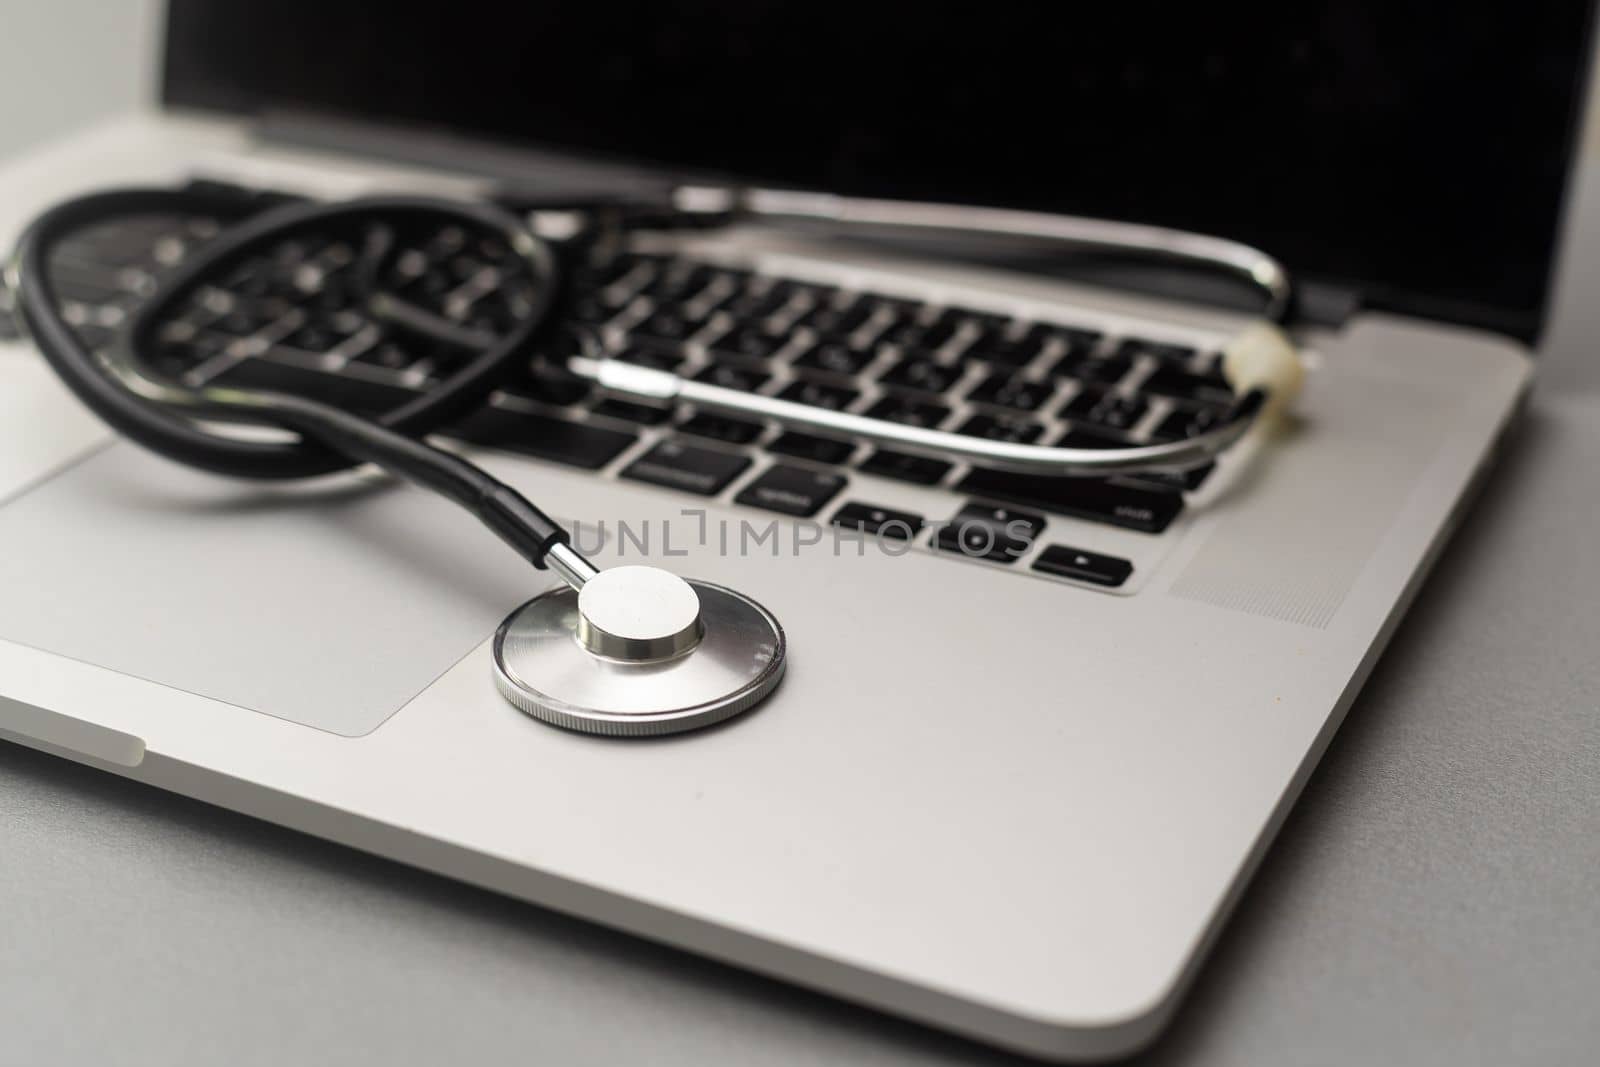 Stethoscope on a computer keyboard by Andelov13